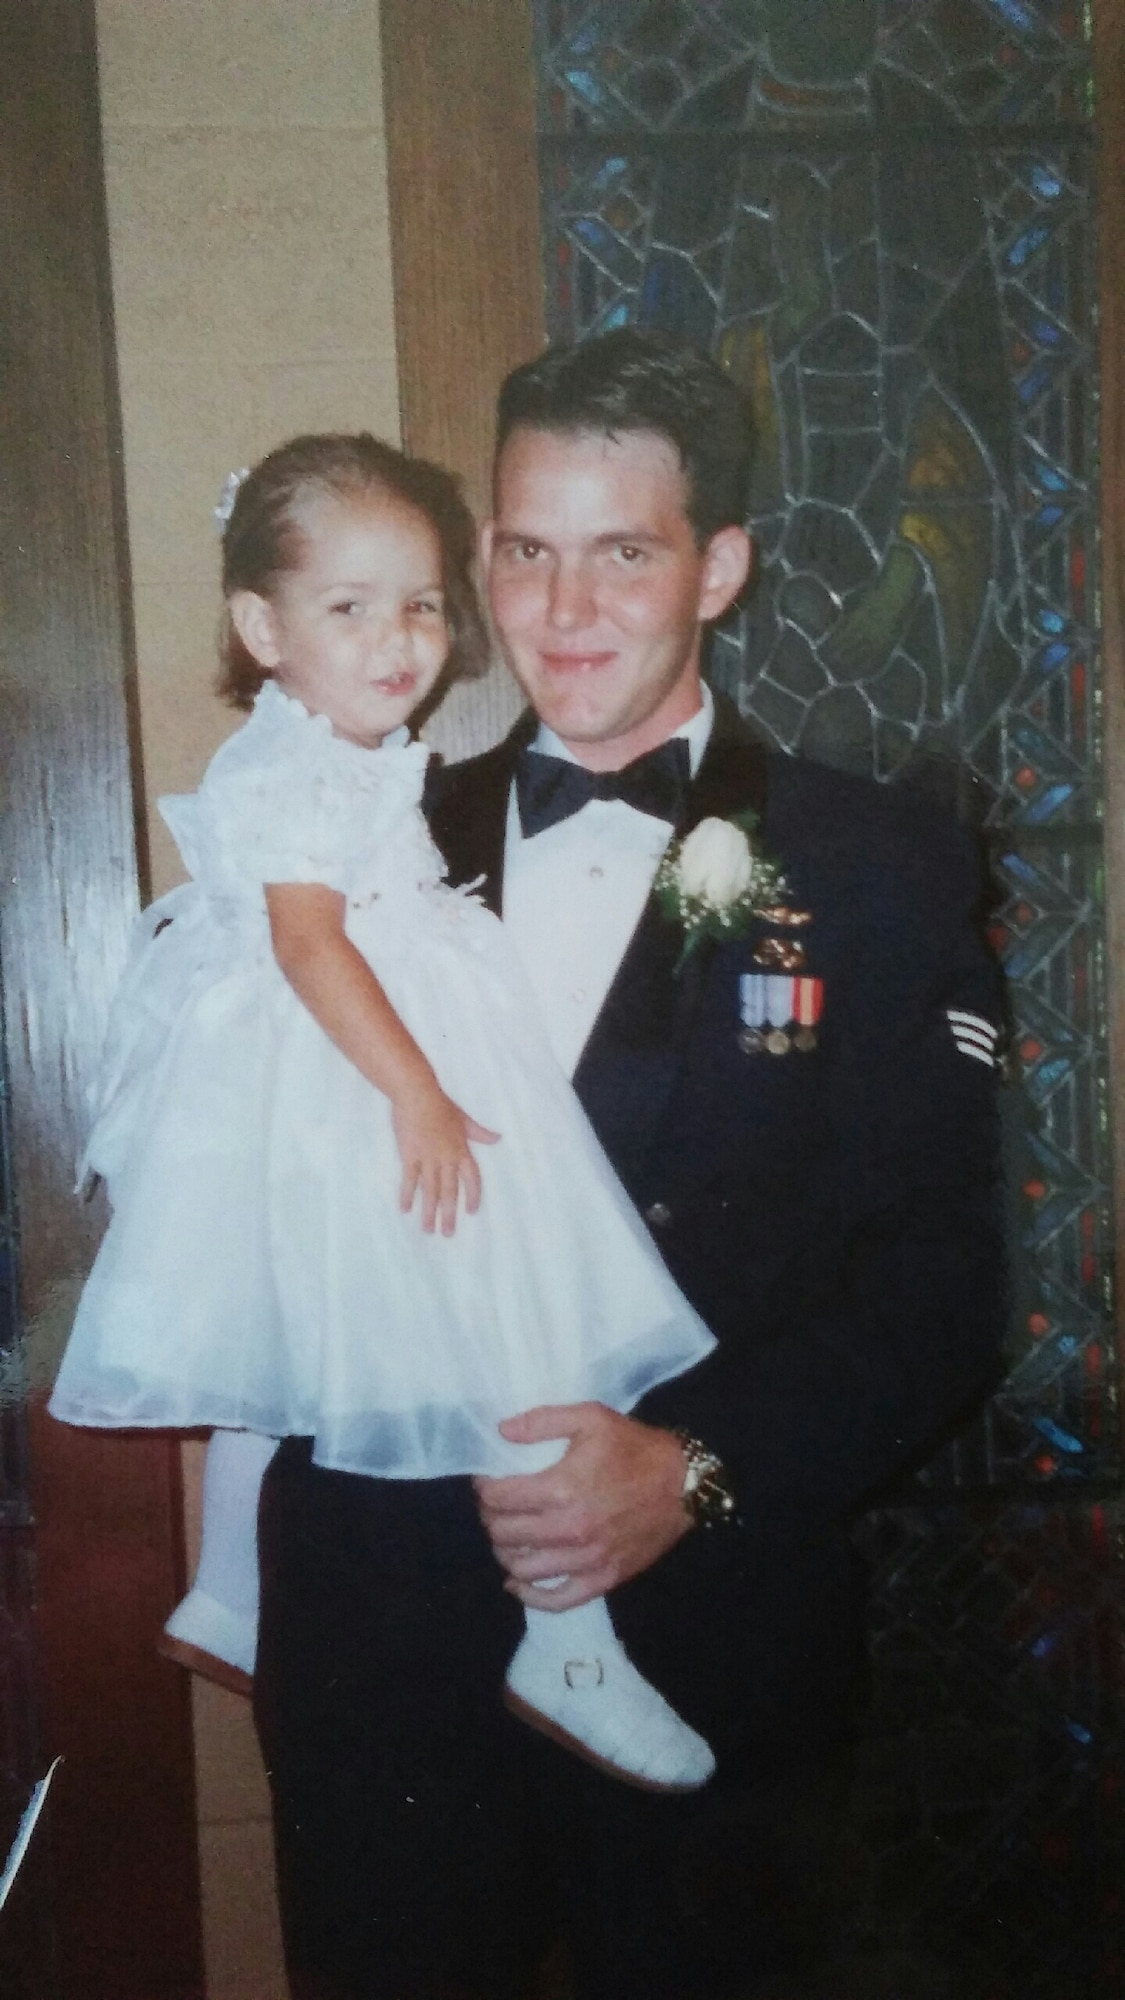 3-year-old Gabrielle Honeycutt, now an Airman Basic and radiology trainee with the 60th Diagnostics and Therapeutics Squadron at David Grant USAF Medical Center, poses with her father, now-Senior Master Sgt. Jerry Honeycutt, 60th Operations Support Squadron, at a wedding in 1999. Father and daughter are both stationed at Travis and are enjoying time together before Airman Honeycutt moves to Joint Base Langley-Eustis, Virginia, to serve at her first duty station. (U.S. Air Force photo / 2nd Lt. Sarah Johnson)